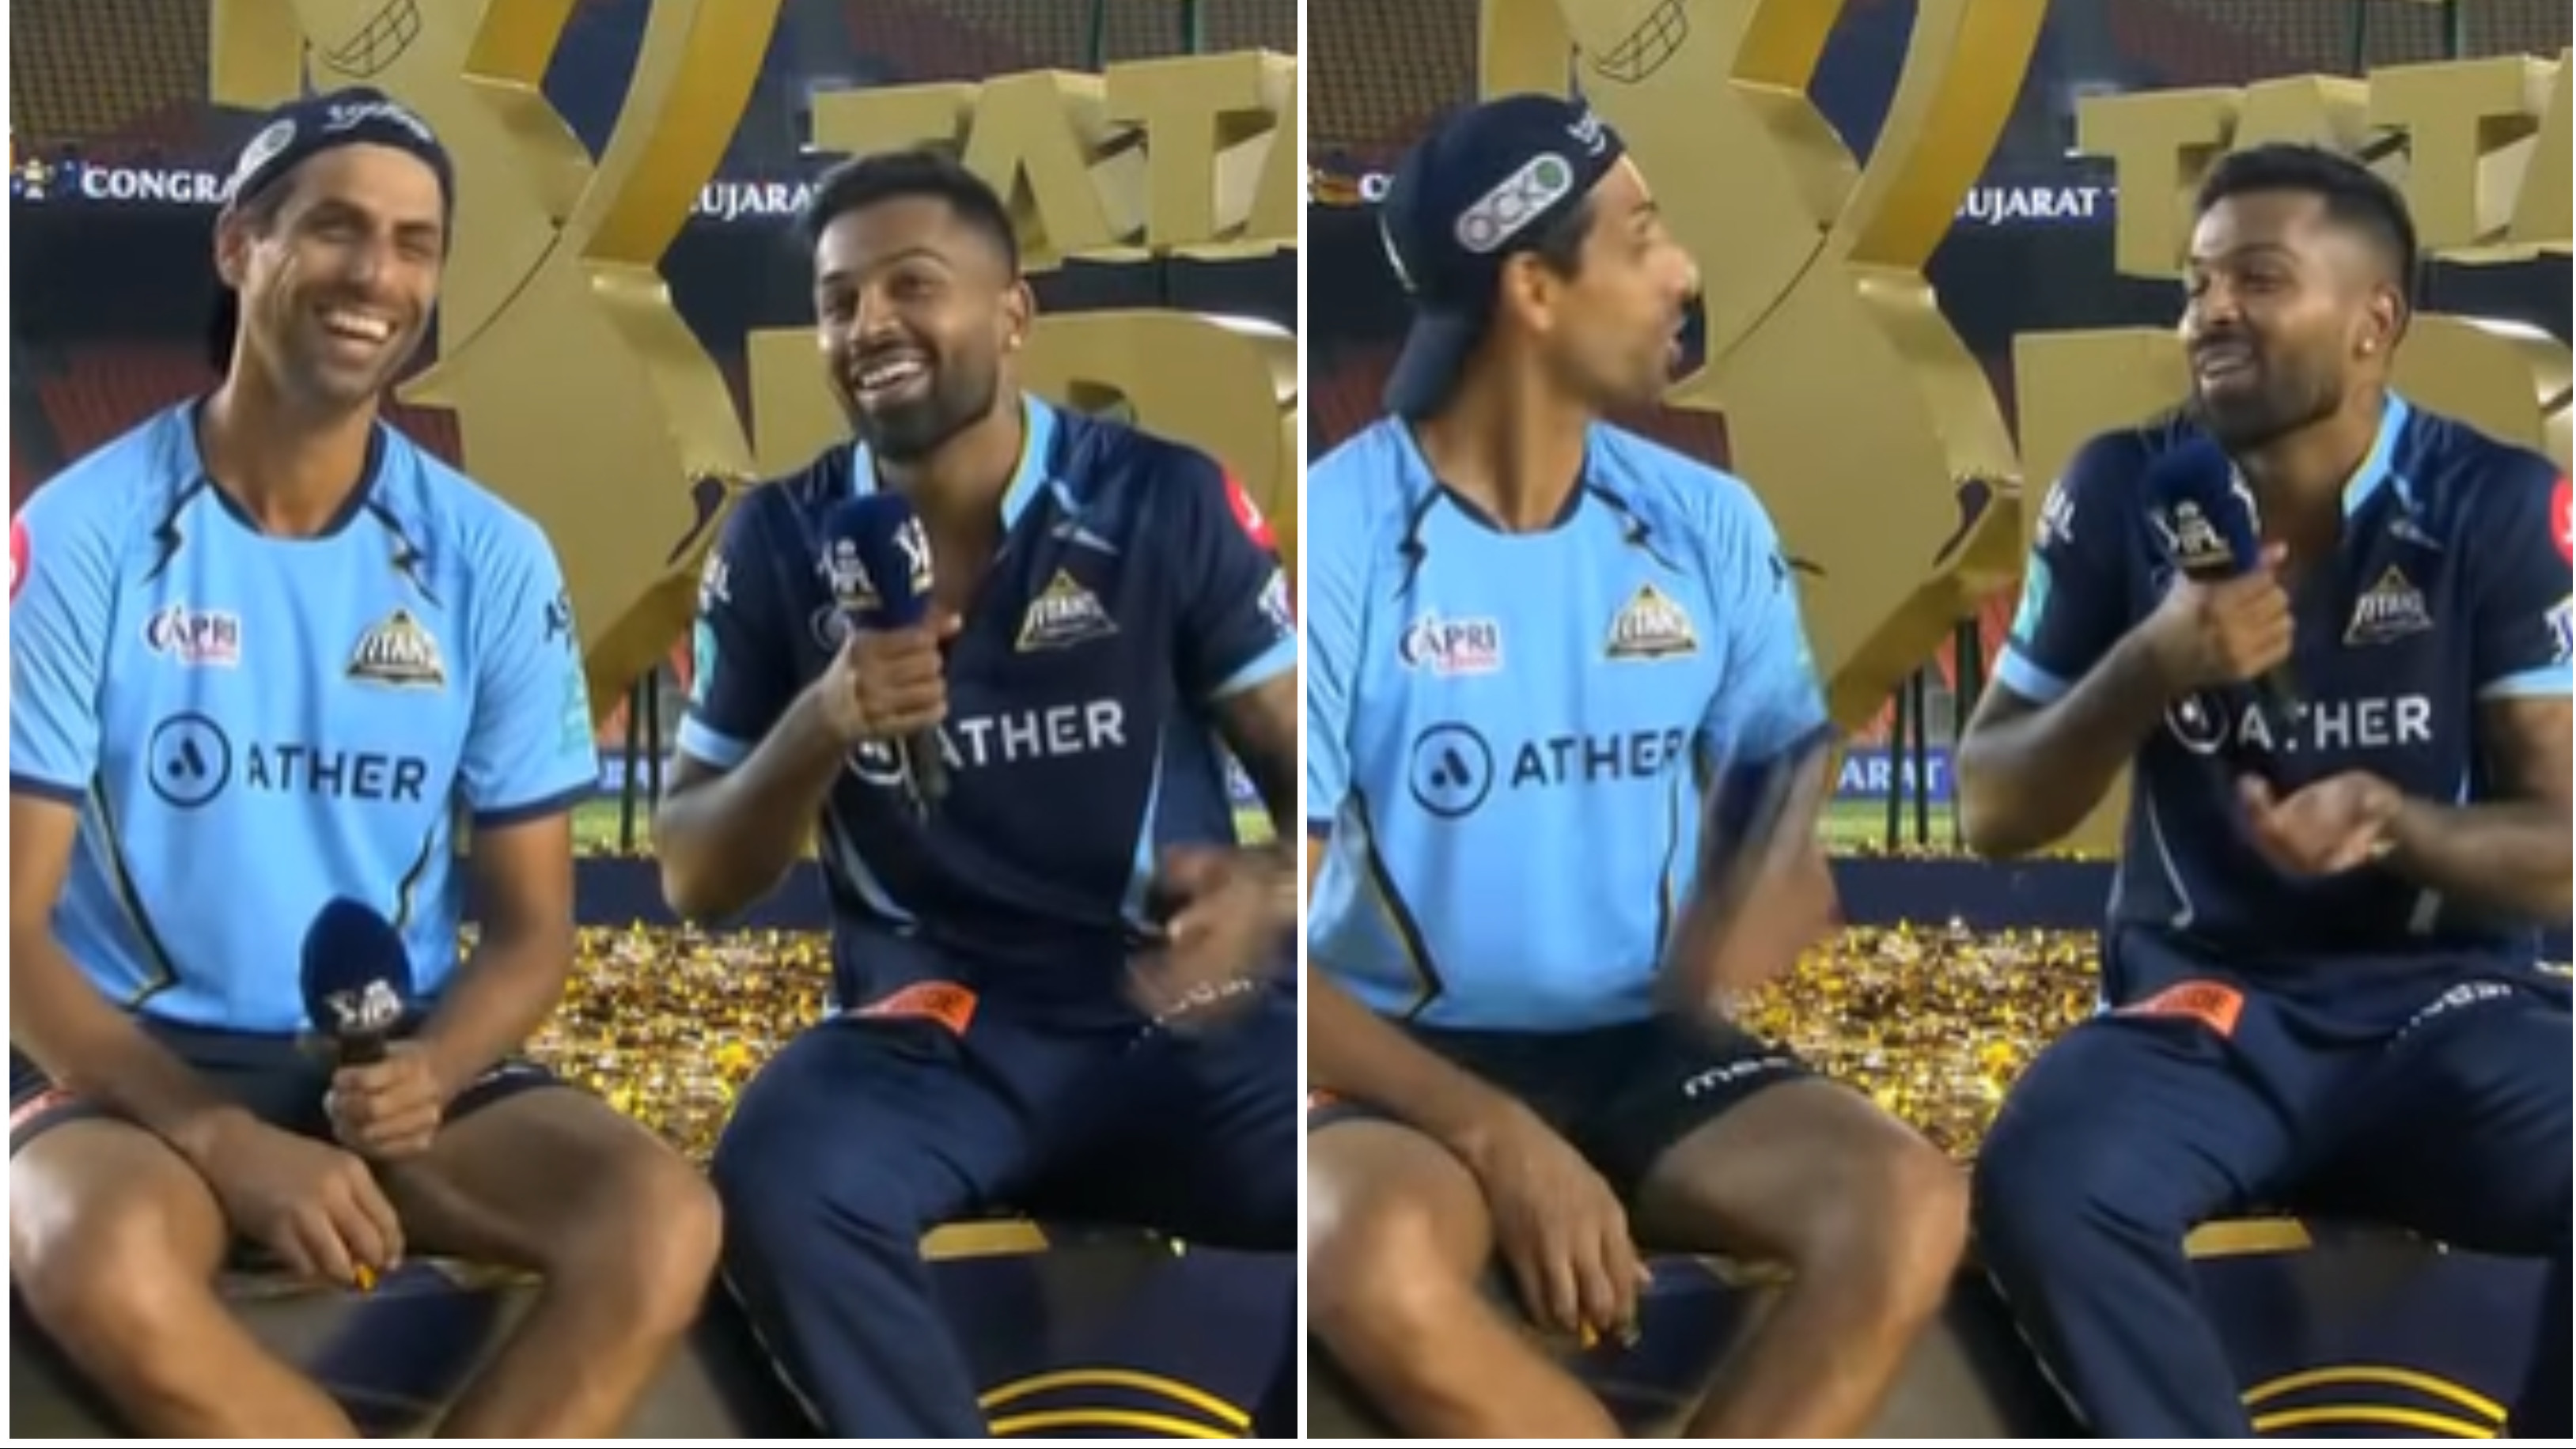 IPL 2022: WATCH – “Credit goes to him”, Hardik Pandya and Ashish Nehra’s fun interview after GT’s title win